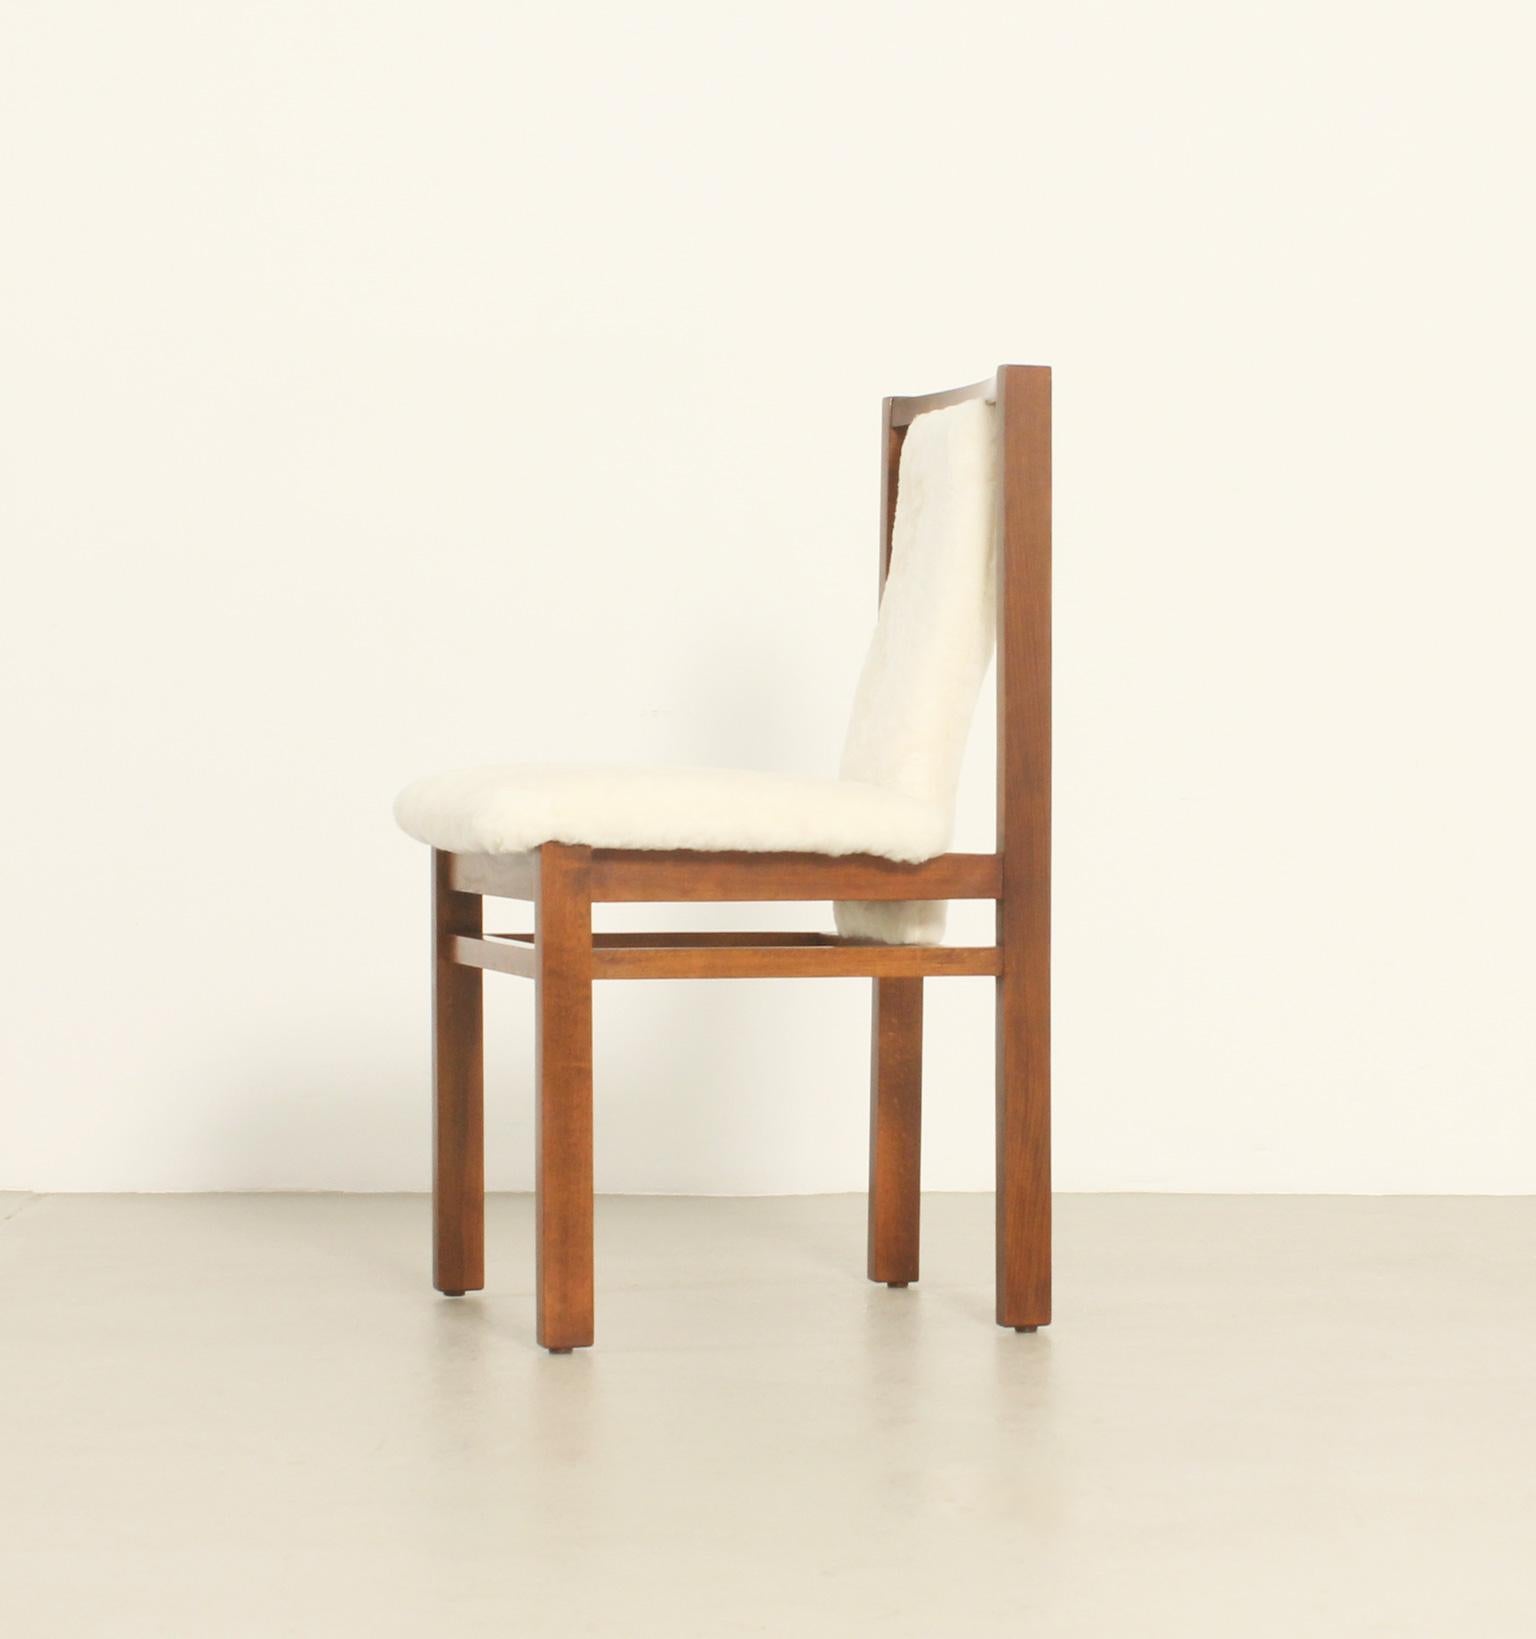 Four Dining Chairs by Jordi Vilanova in Oak Wood and Sheepskin, Spain, 1960's For Sale 3